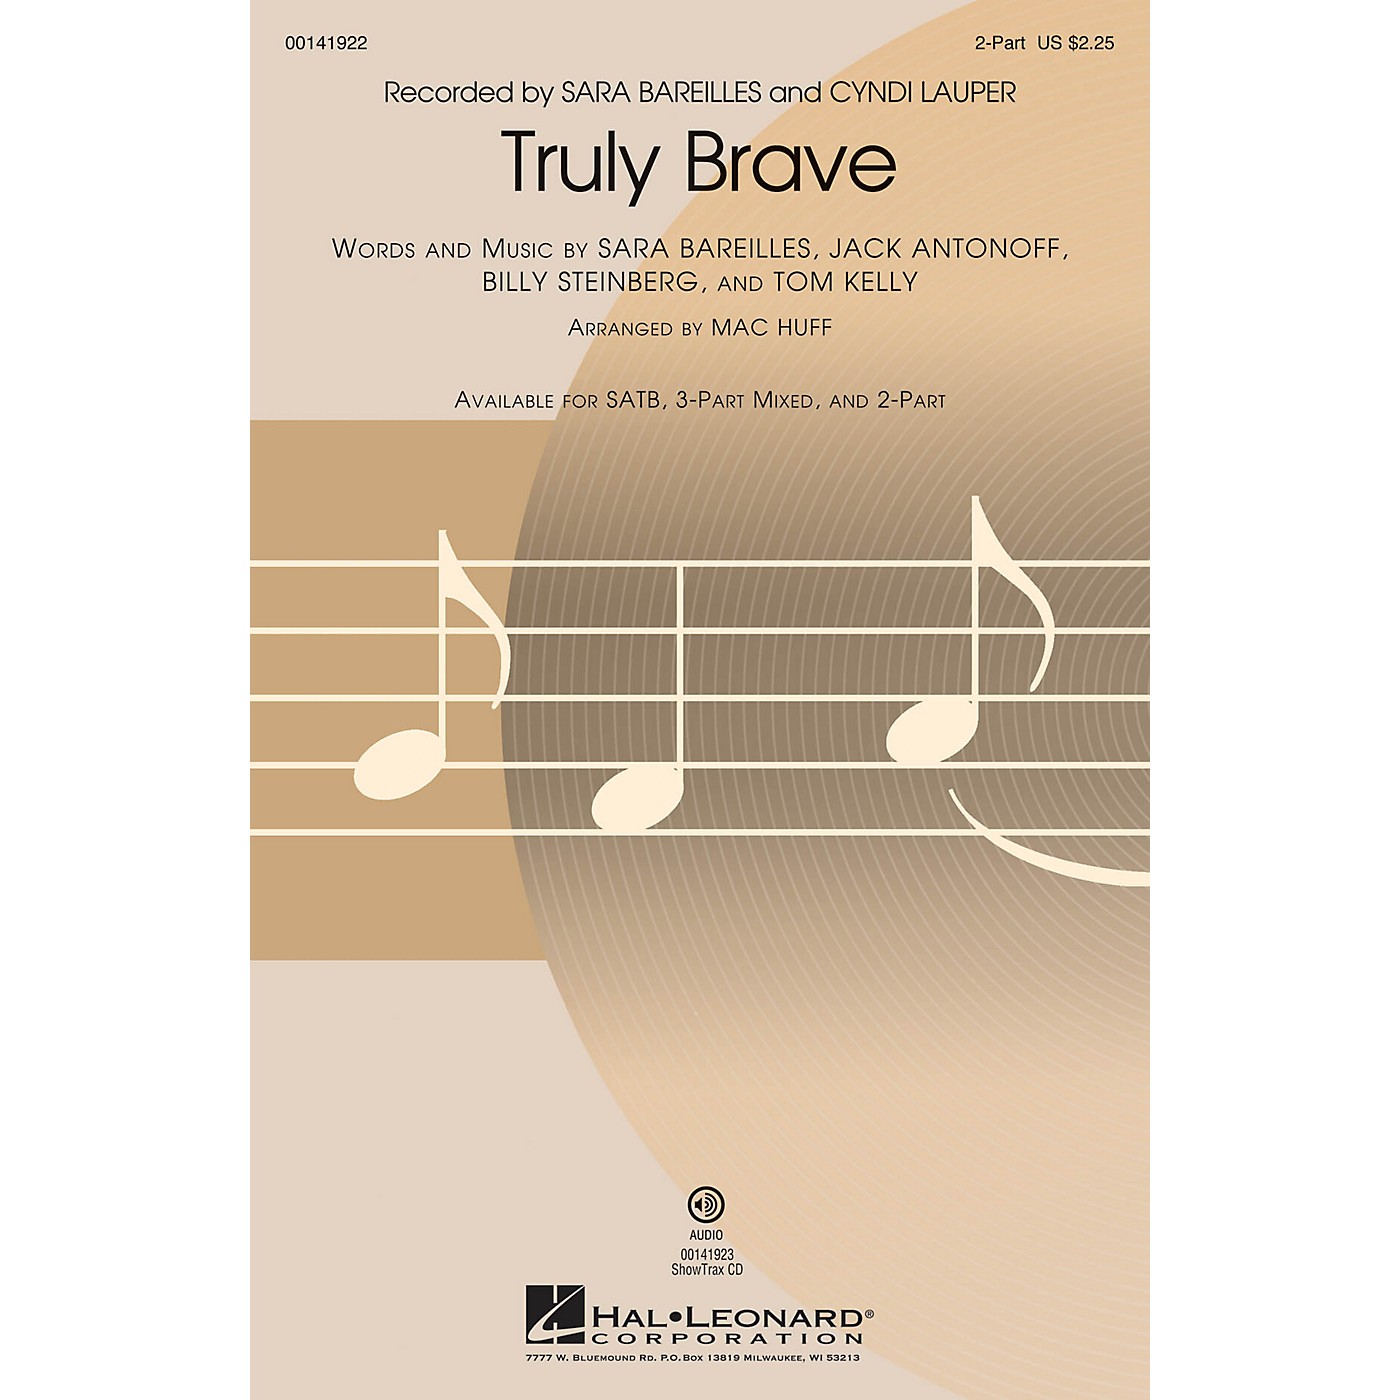 Hal Leonard Truly Brave 2-Part by Sara Bareilles arranged by Mac Huff thumbnail